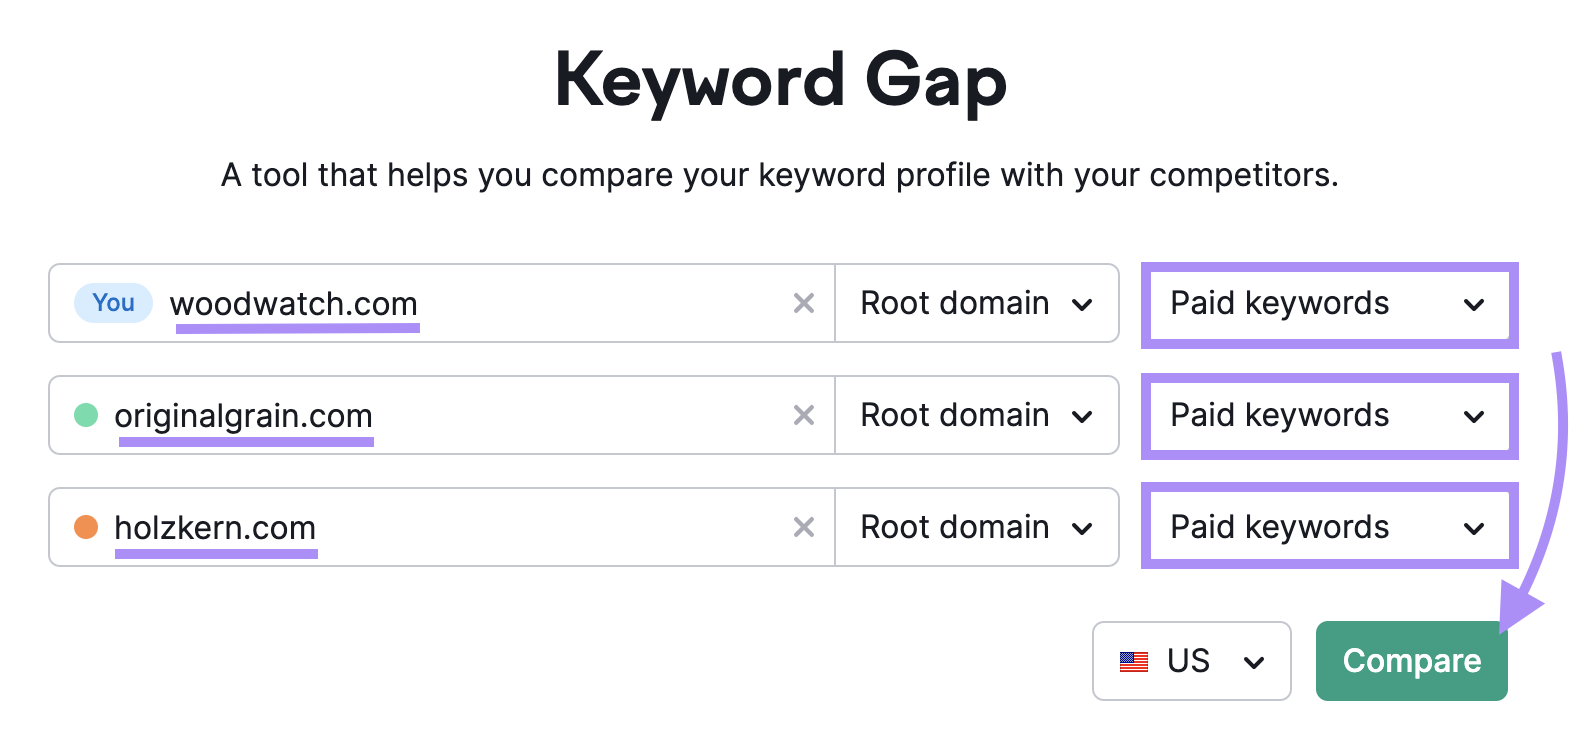 Competitors' domains entered into the Keyword Gap search bar